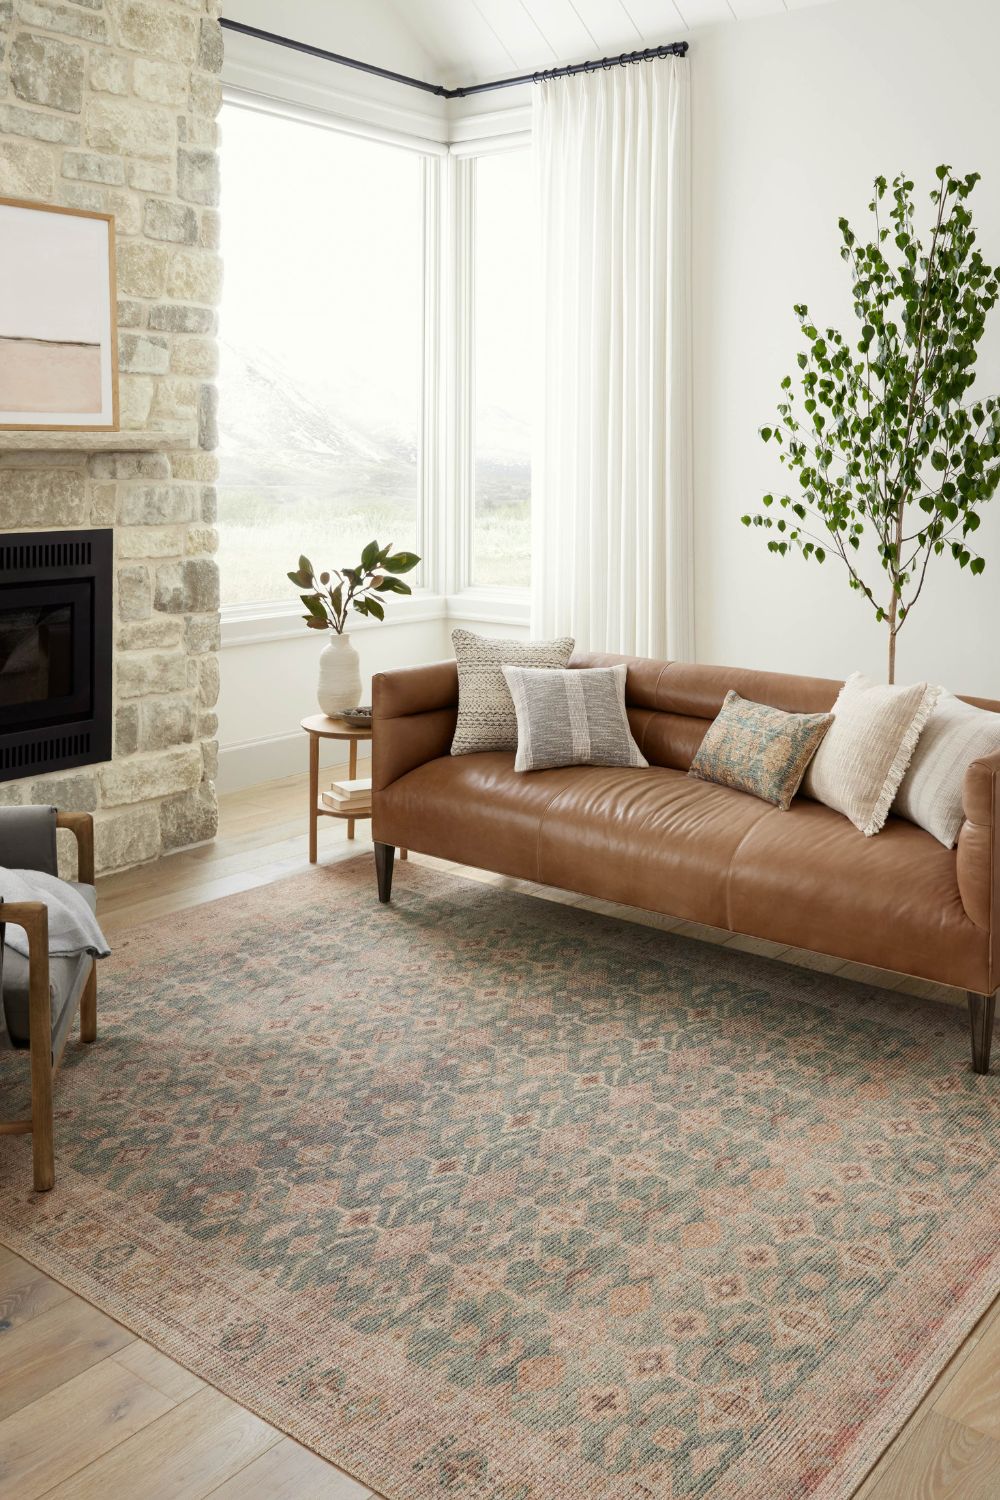 Update your living room with these modern, durable rugs from Angela Rose x Loloi. www.angelarosehome.com